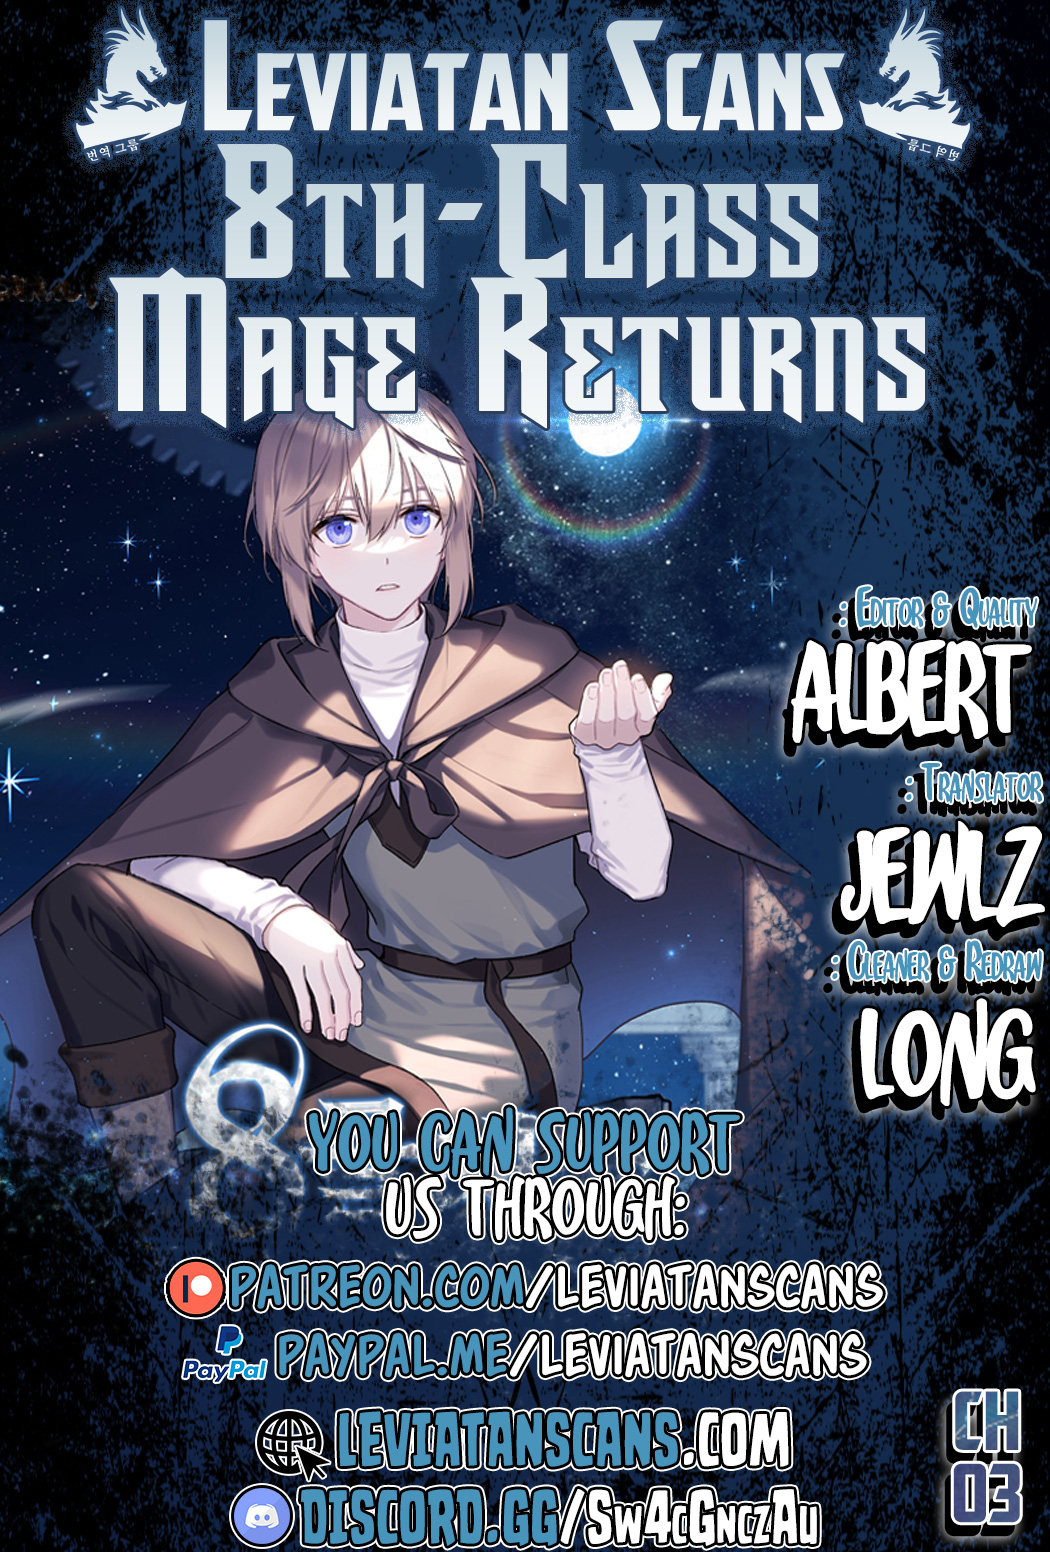 Return of the 8th Class Magician - Chapter 7122 - Image 1